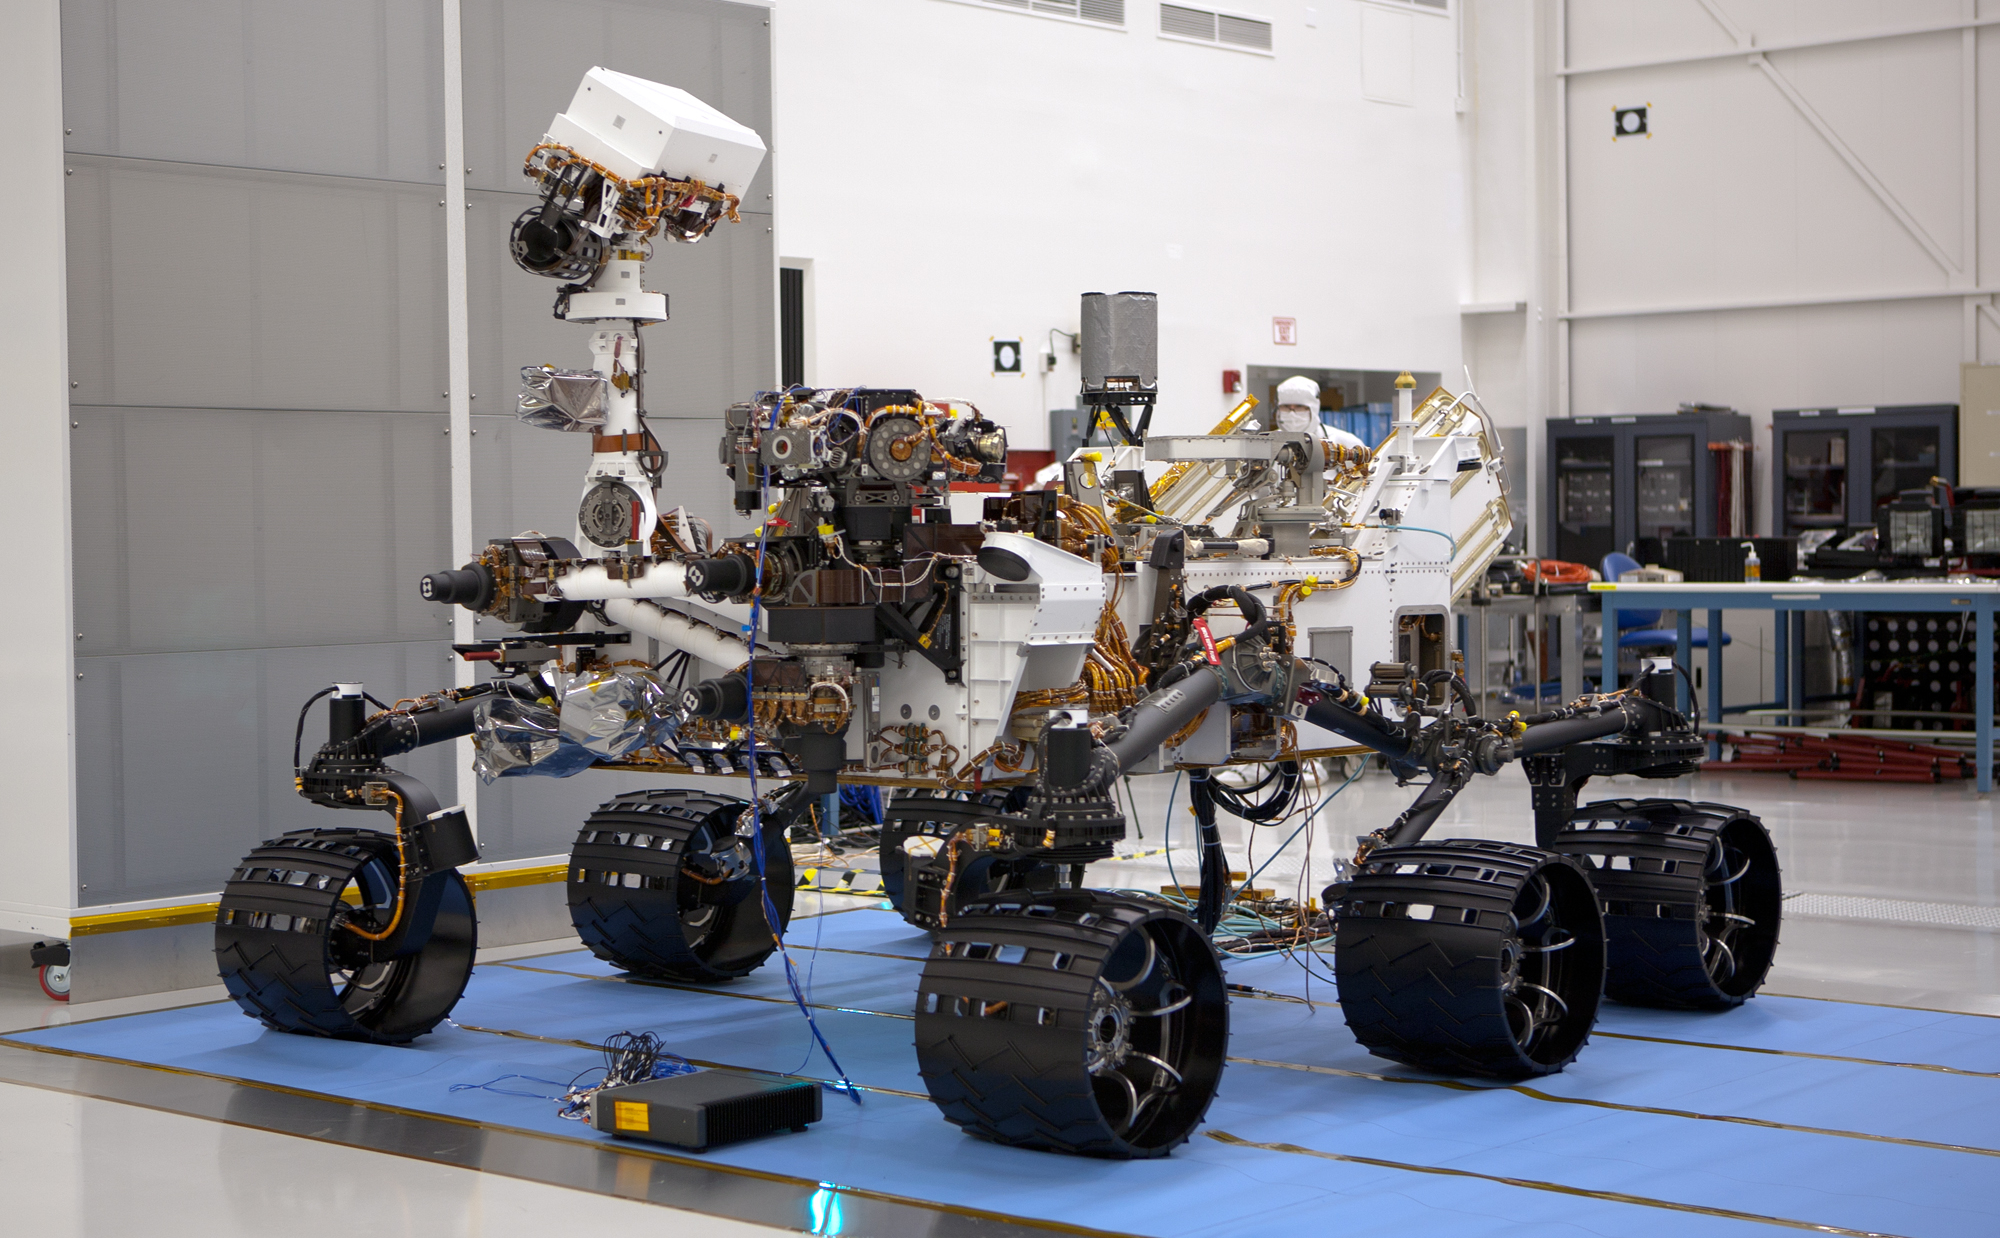 This is the right-eye member of a stereo pair of images of the Mars Science Laboratory mission's rover, Curiosity.